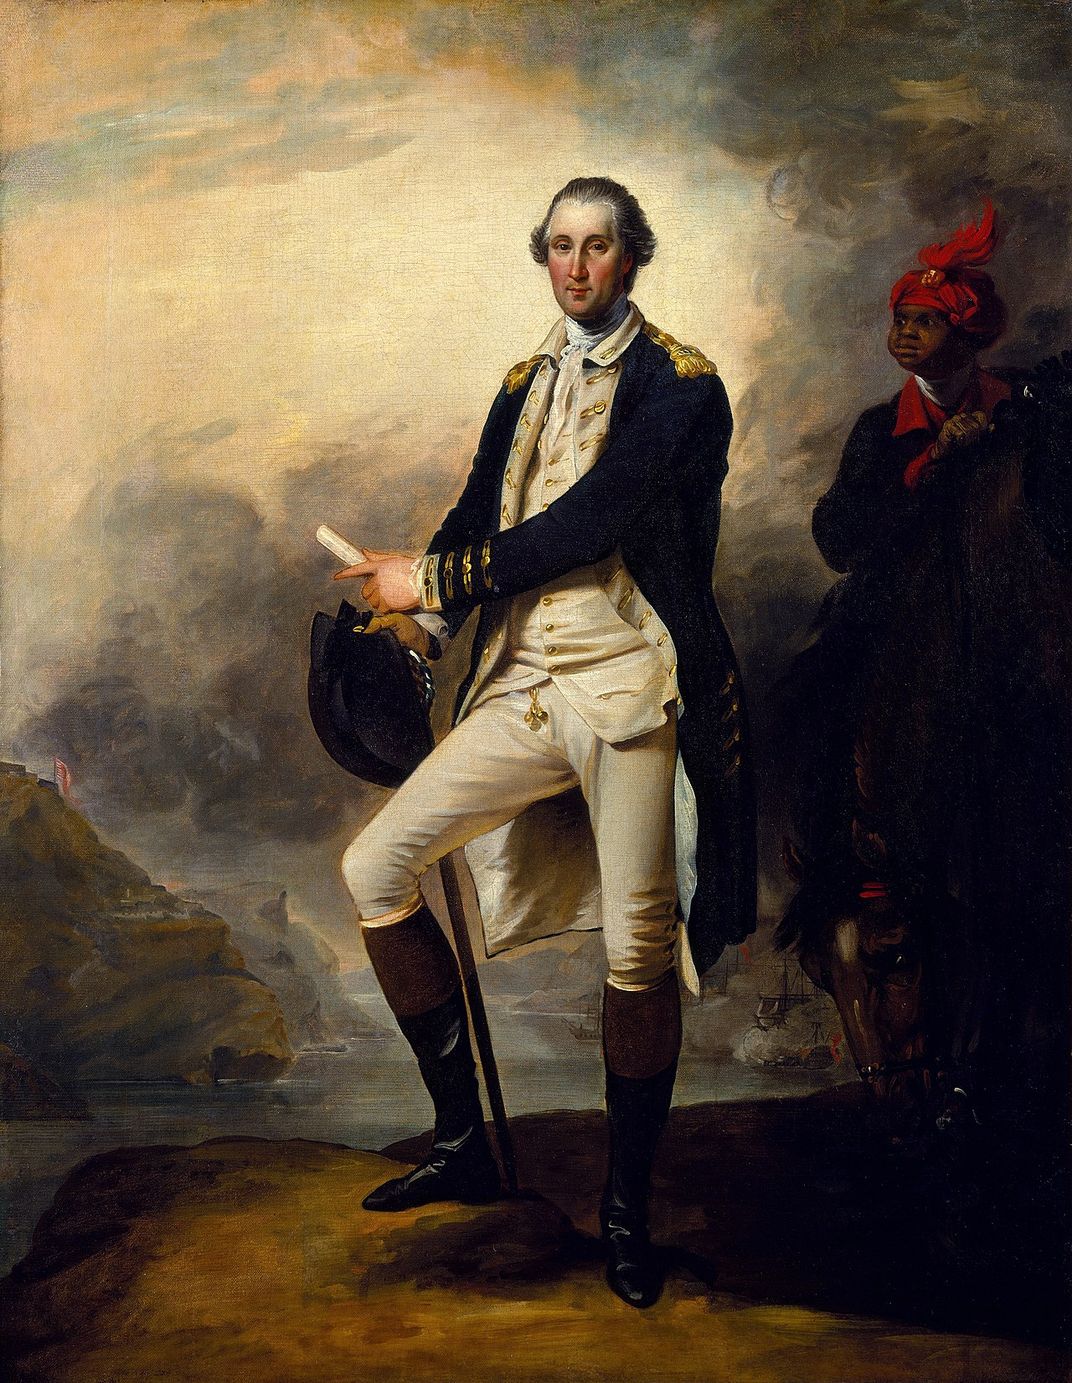 A 1780 John Trumbull painting of George Washington, with William Lee, Washington's enslaved servant, in the background